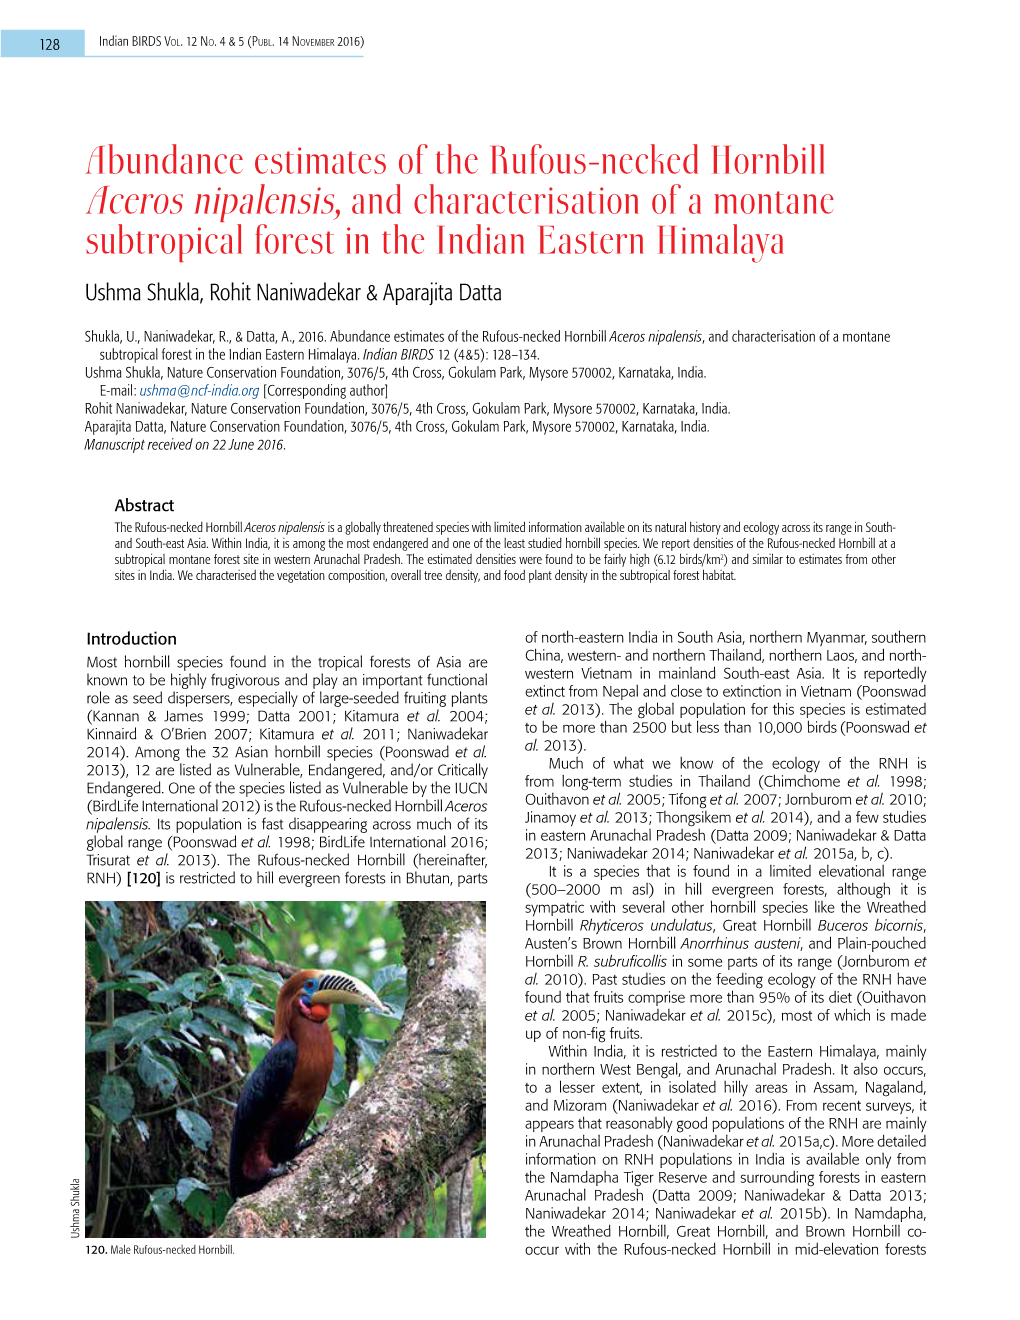 Abundance Estimates of the Rufous-Necked Hornbill Aceros Nipalensis, and Characterisation of a Montane Subtropical Forest In